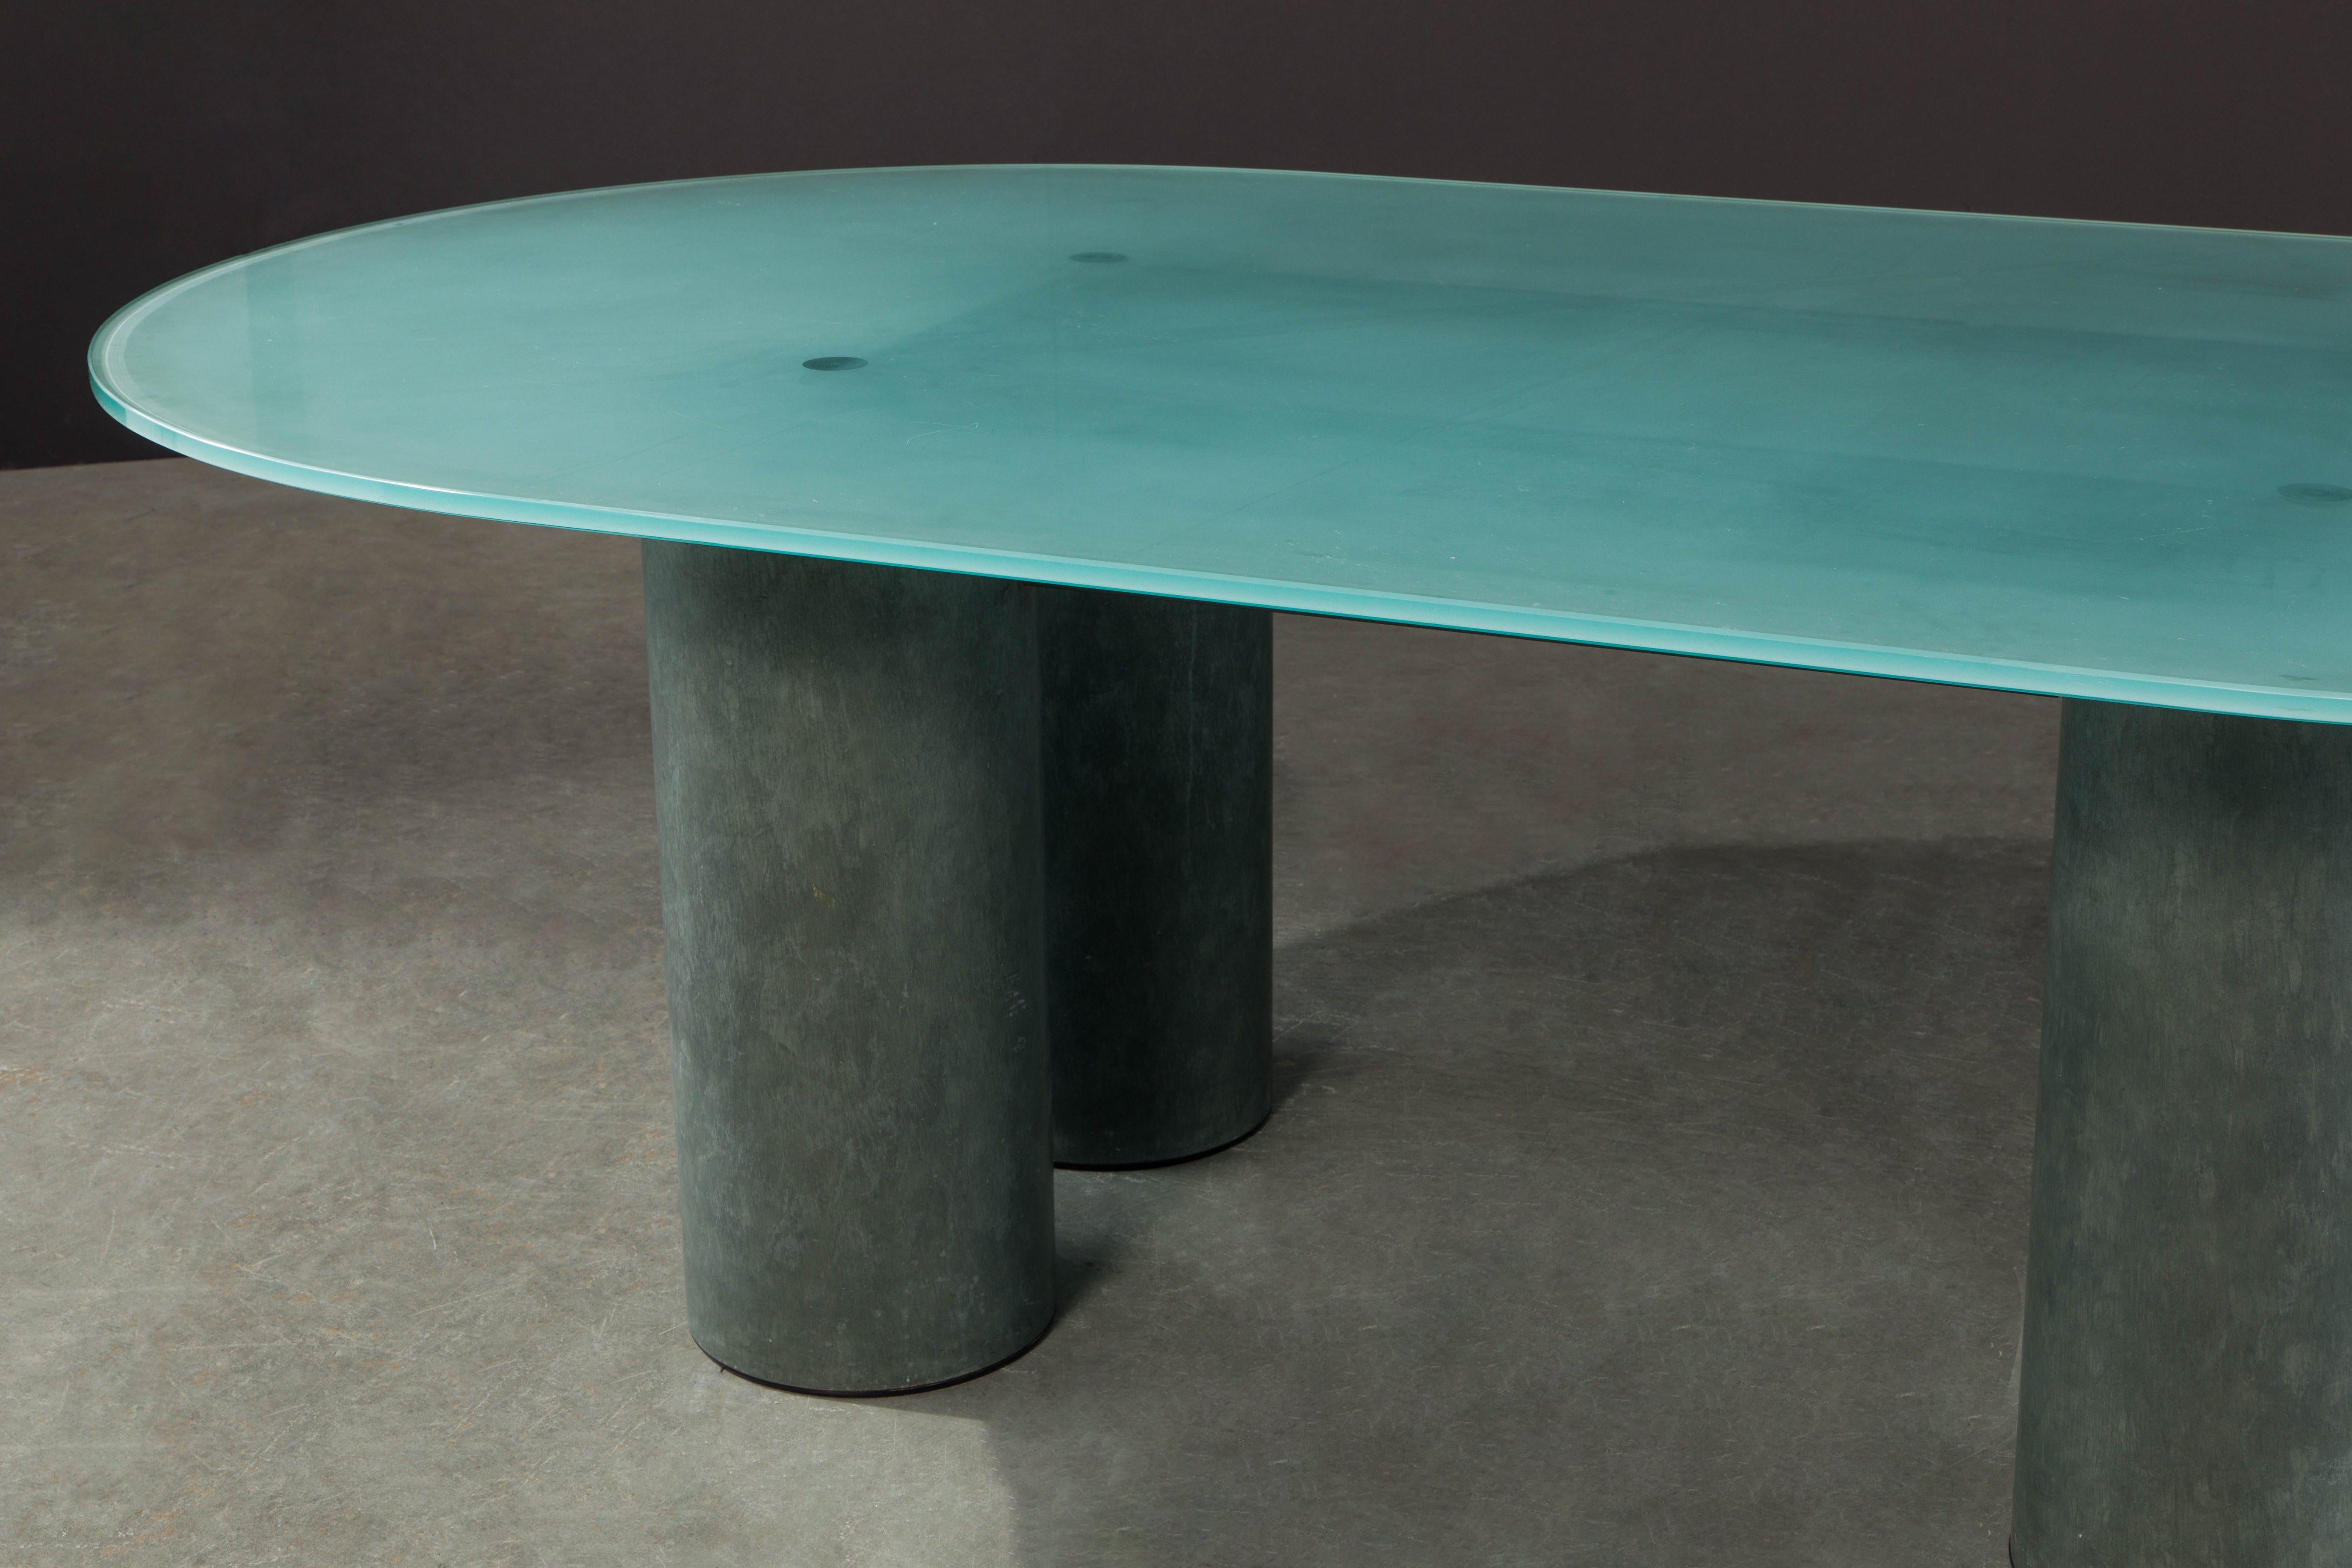 Lella & Massimo Vignelli 'Serenissimo' Dining Table for Acerbis, Italy c 1980 1